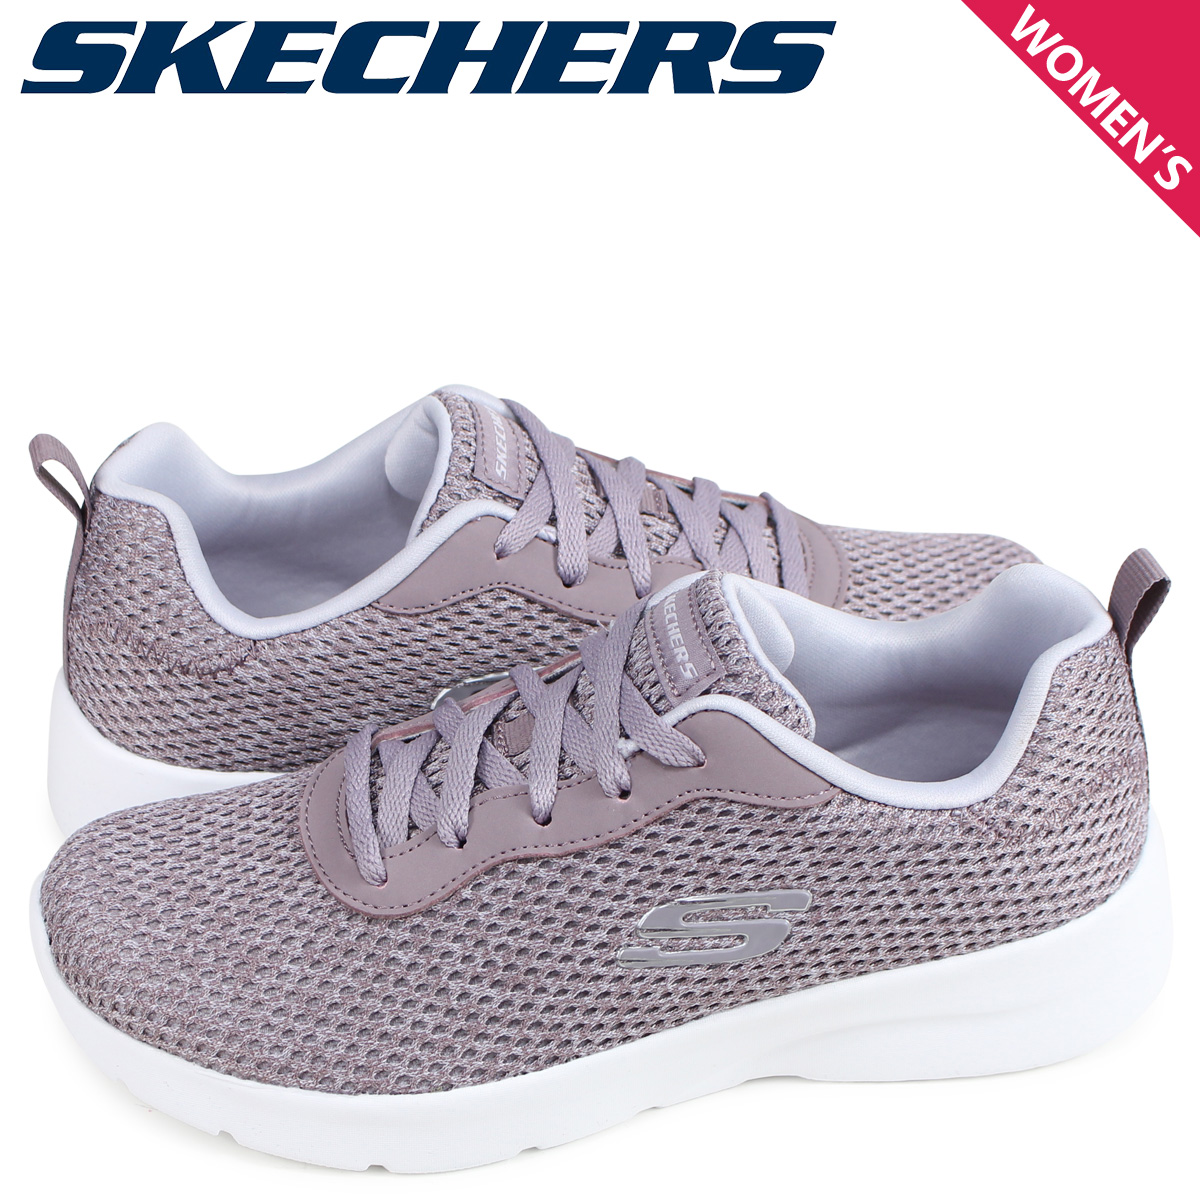 shoes of skechers